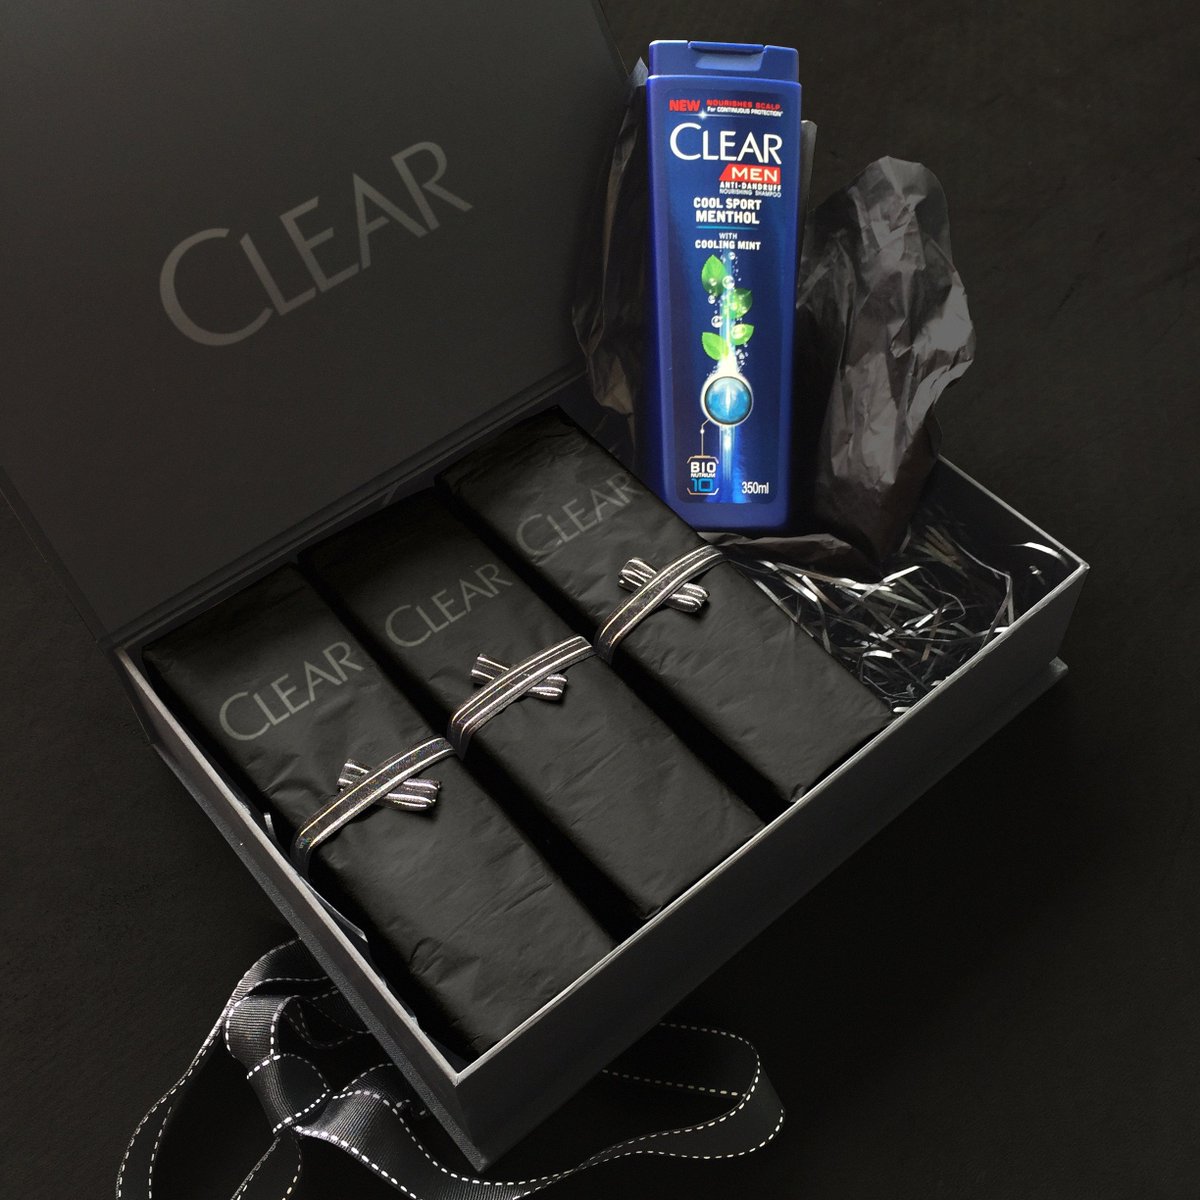 Just received a gift from #CLEARMEN. Merry Christmas! https://t.co/nNwA36ArUv